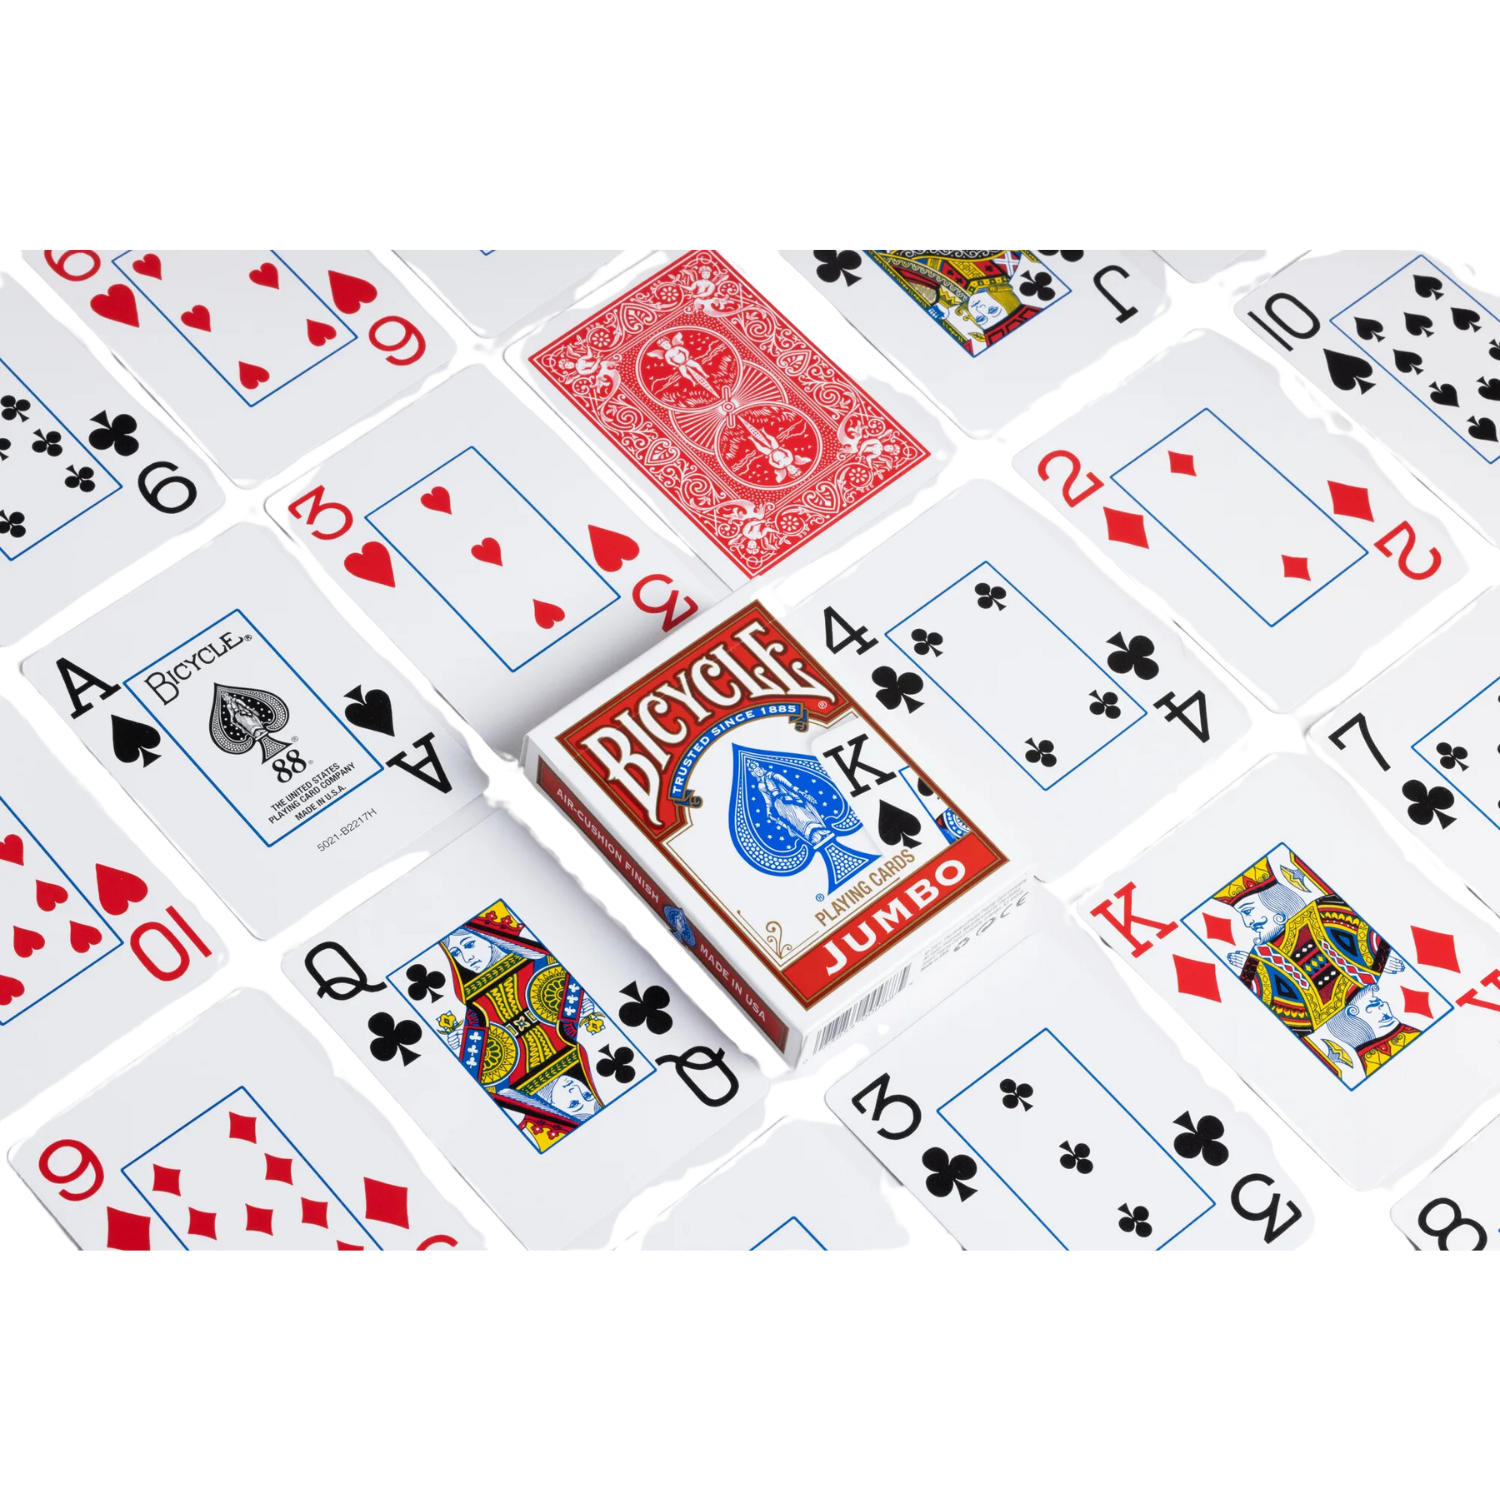 Image of several Bicycle Jumbo Index playing cards.